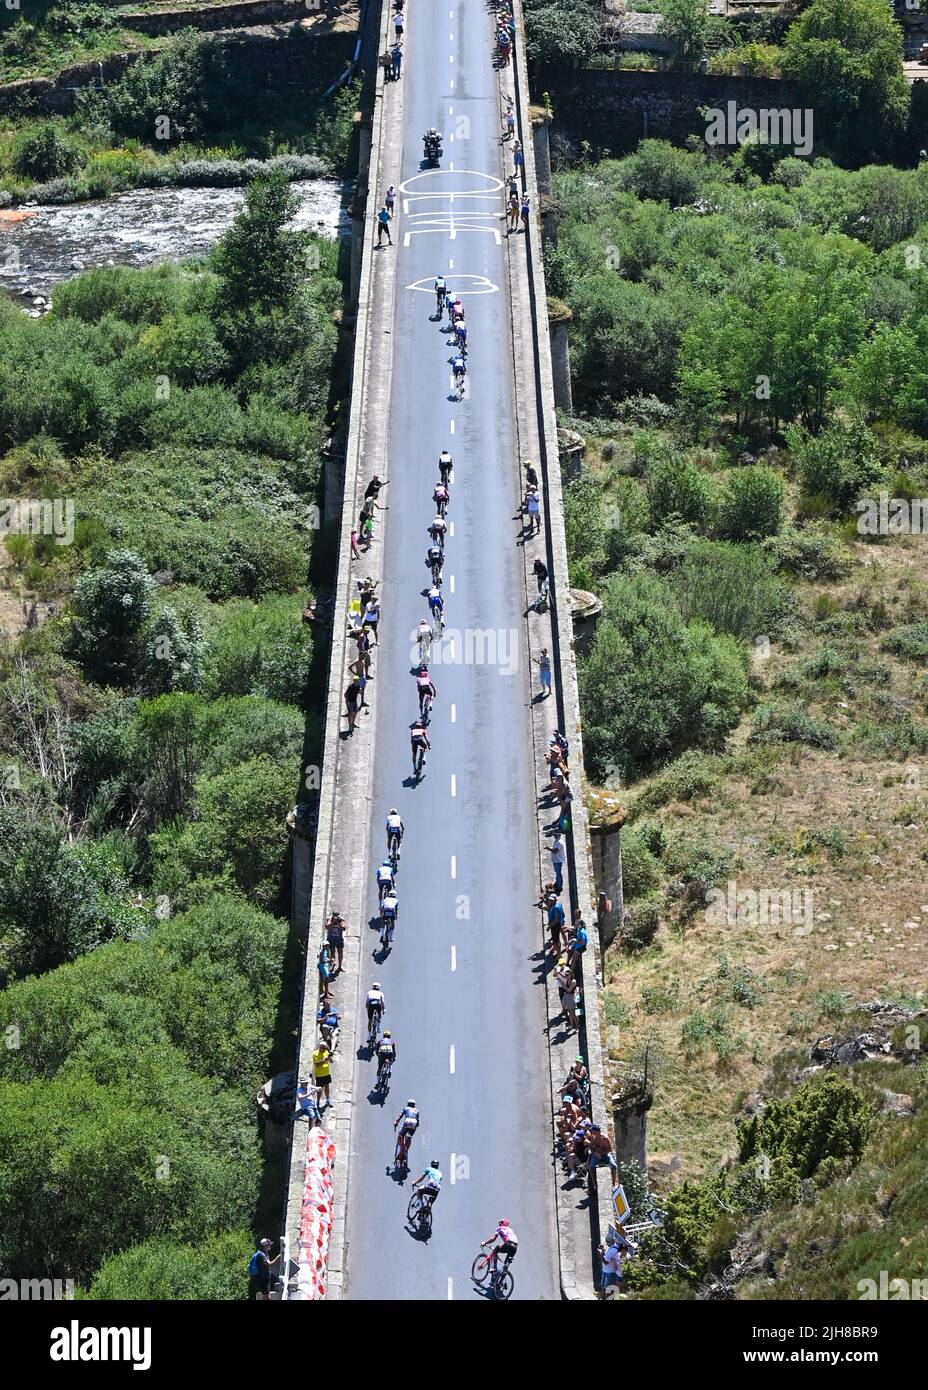 The Peloton during Tour De France, Stage 14, France, 16th July 2022, Credit:David Stockman/Goding Images/Alamay Live News Stock Photo